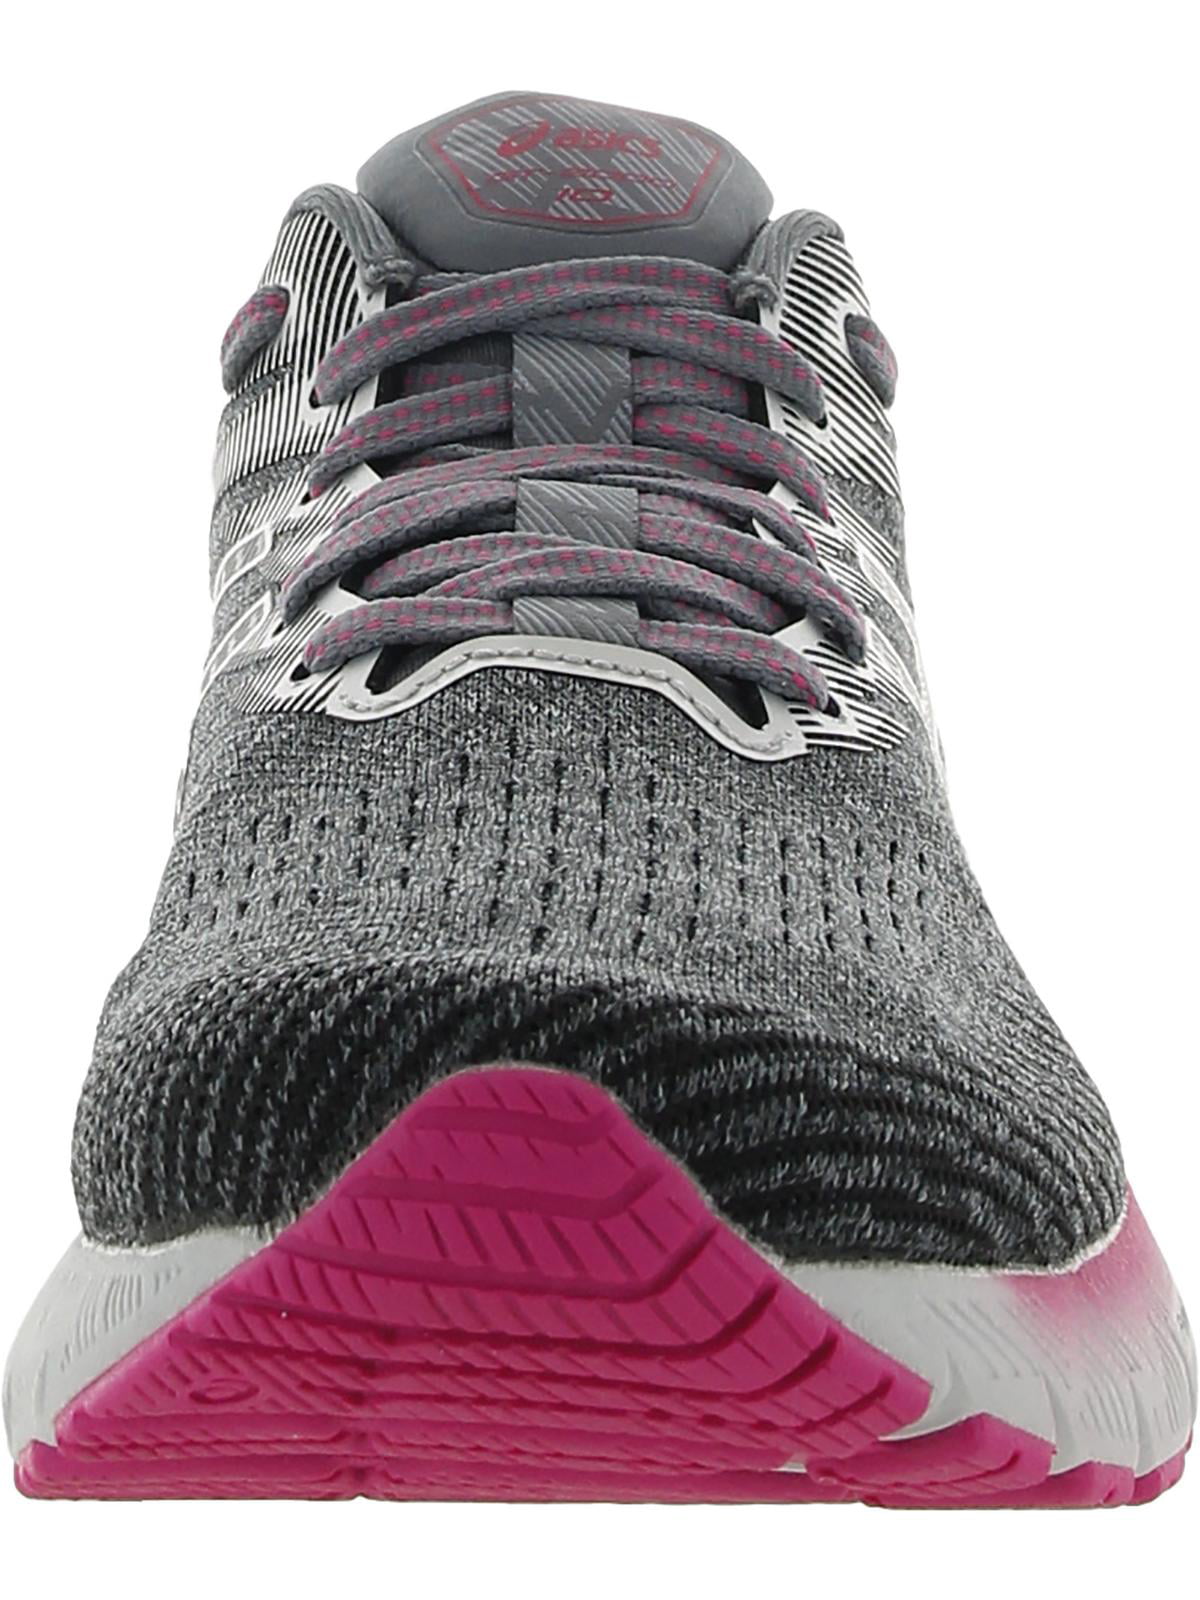 ASICS MetaRide Womens Breathable Gym Running Shoes